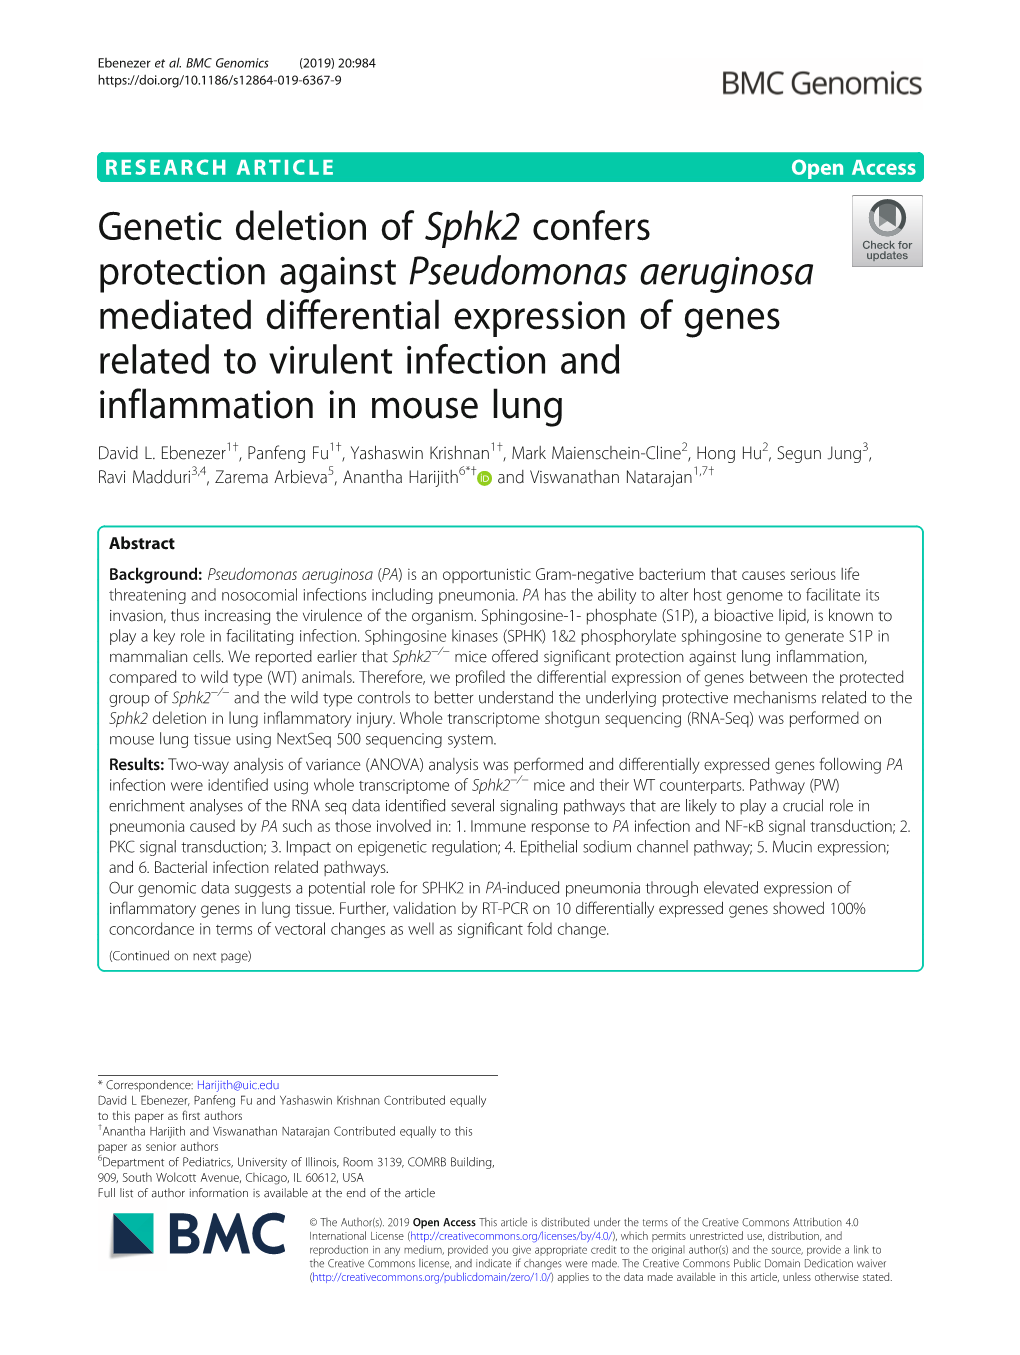 Genetic Deletion of Sphk2 Confers Protection Against Pseudomonas Aeruginosa Mediated Differential Expression of Genes Related To